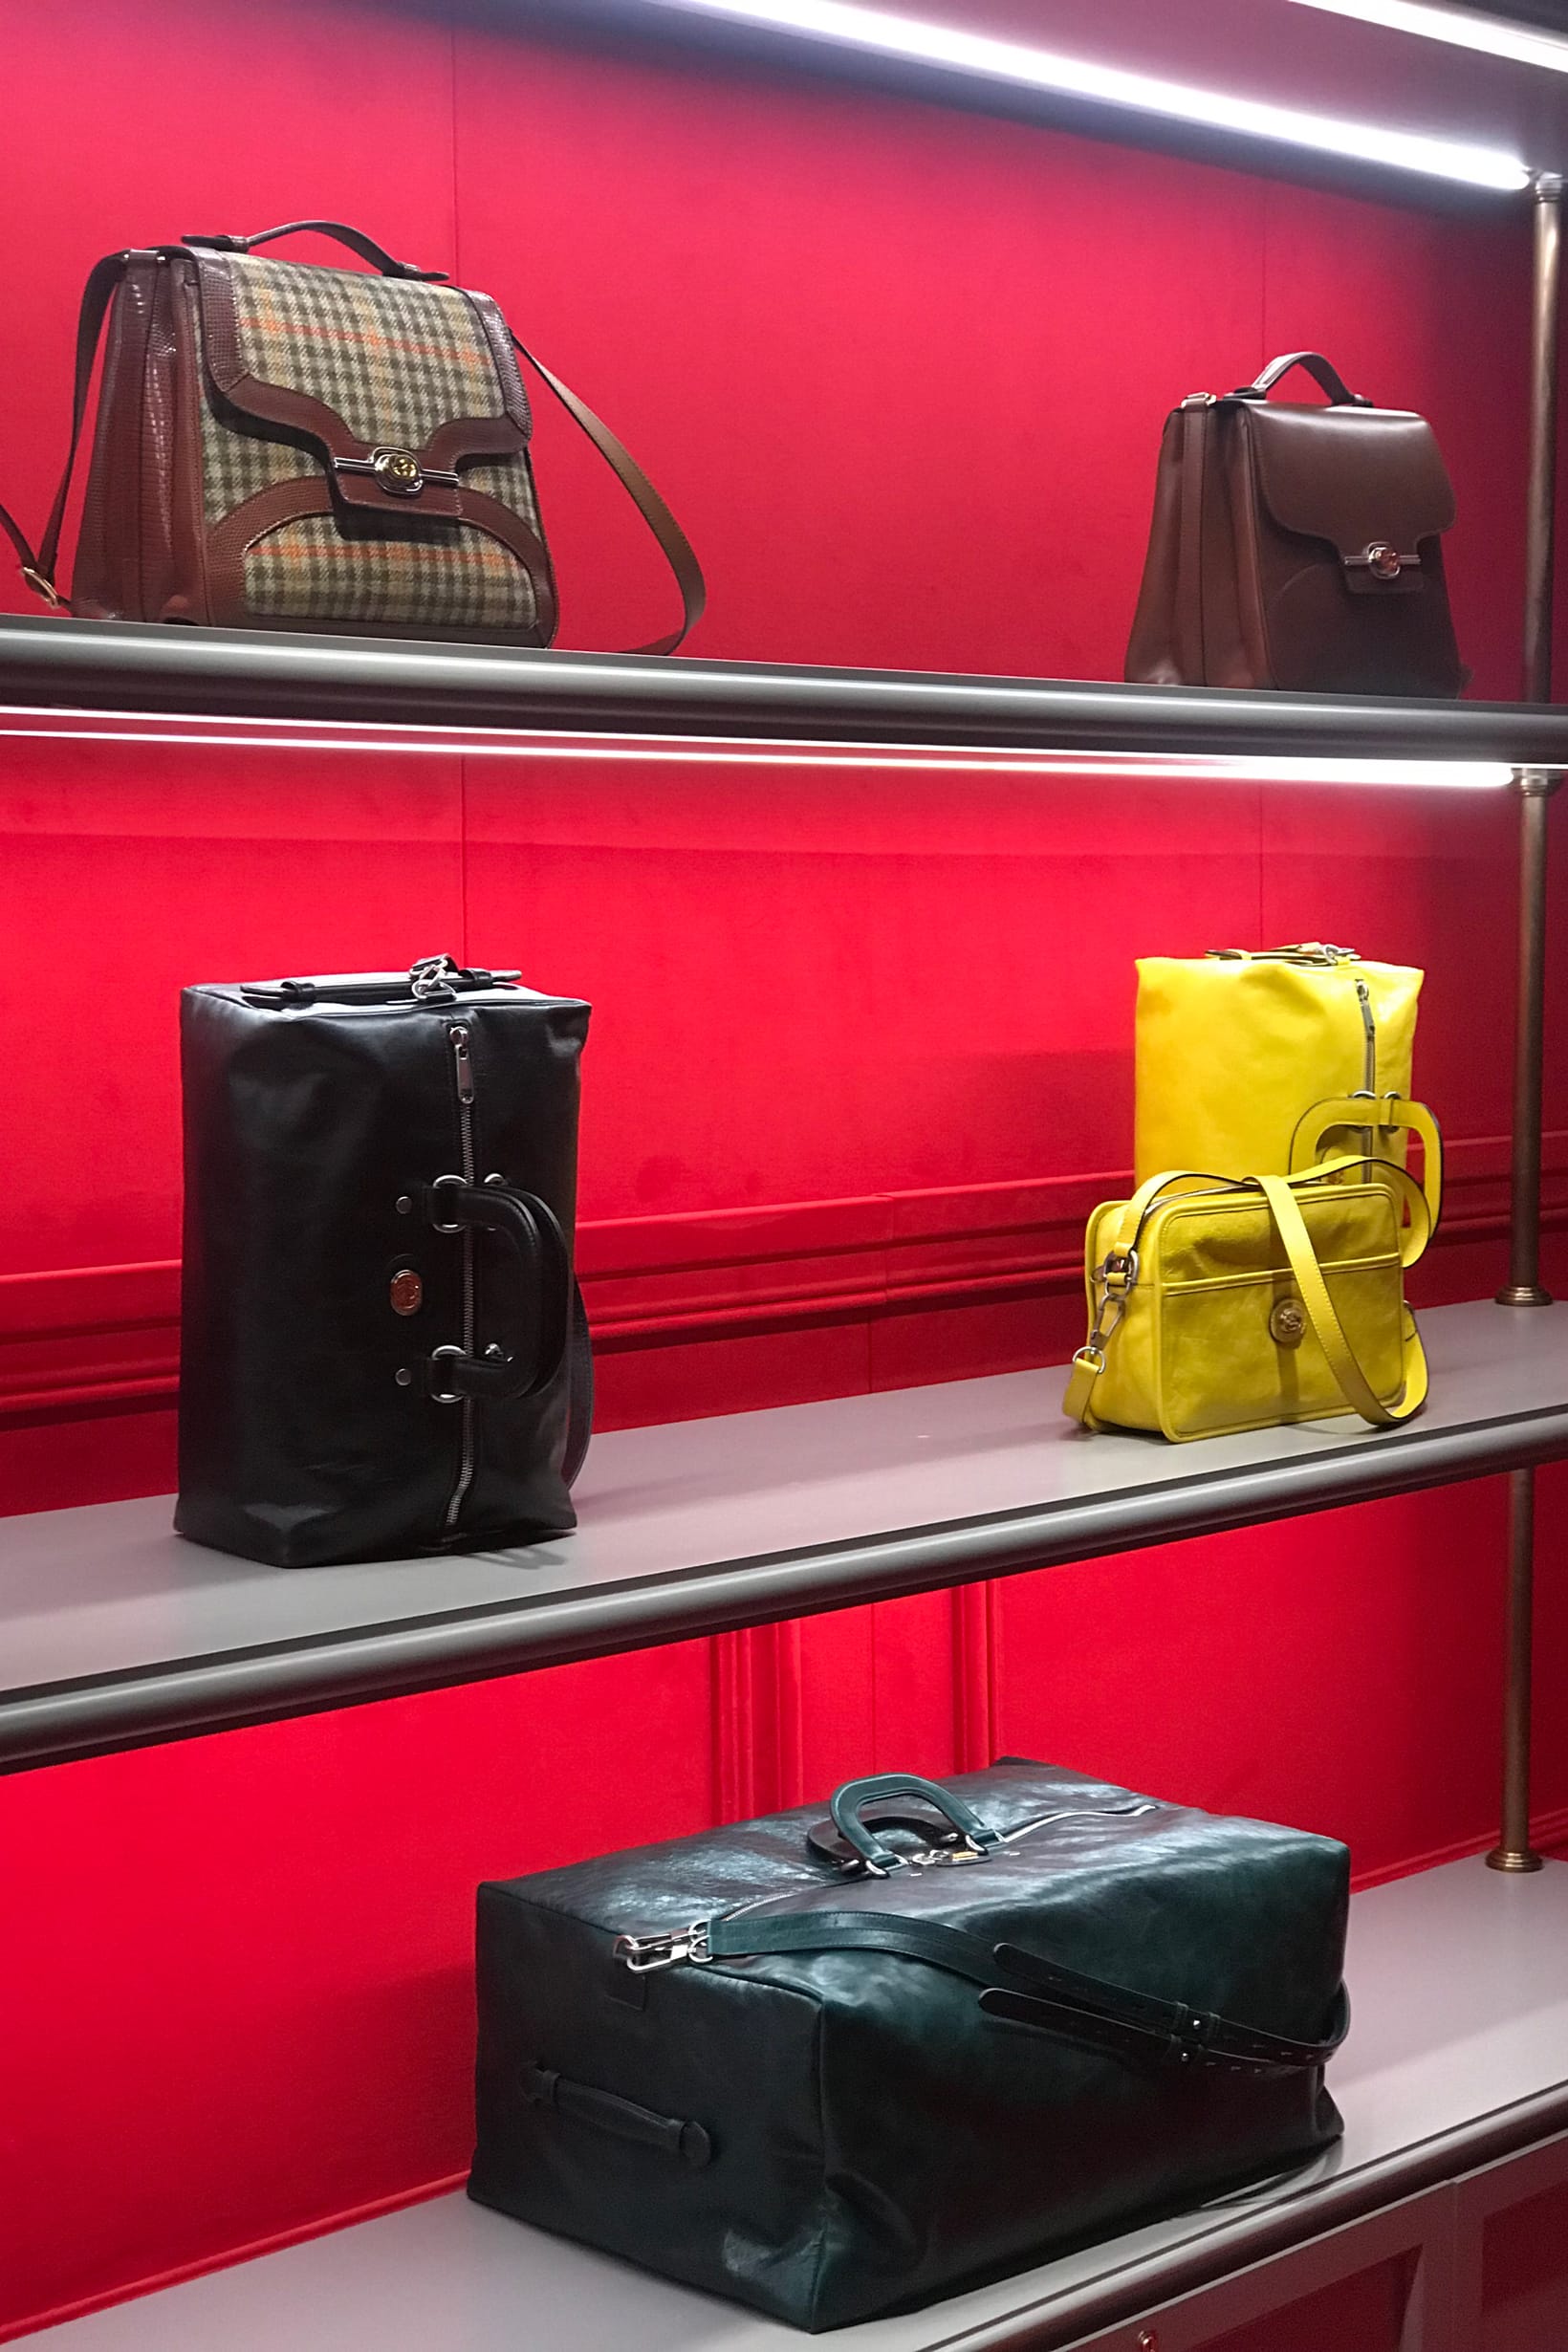 gucci new collection 2019 bags